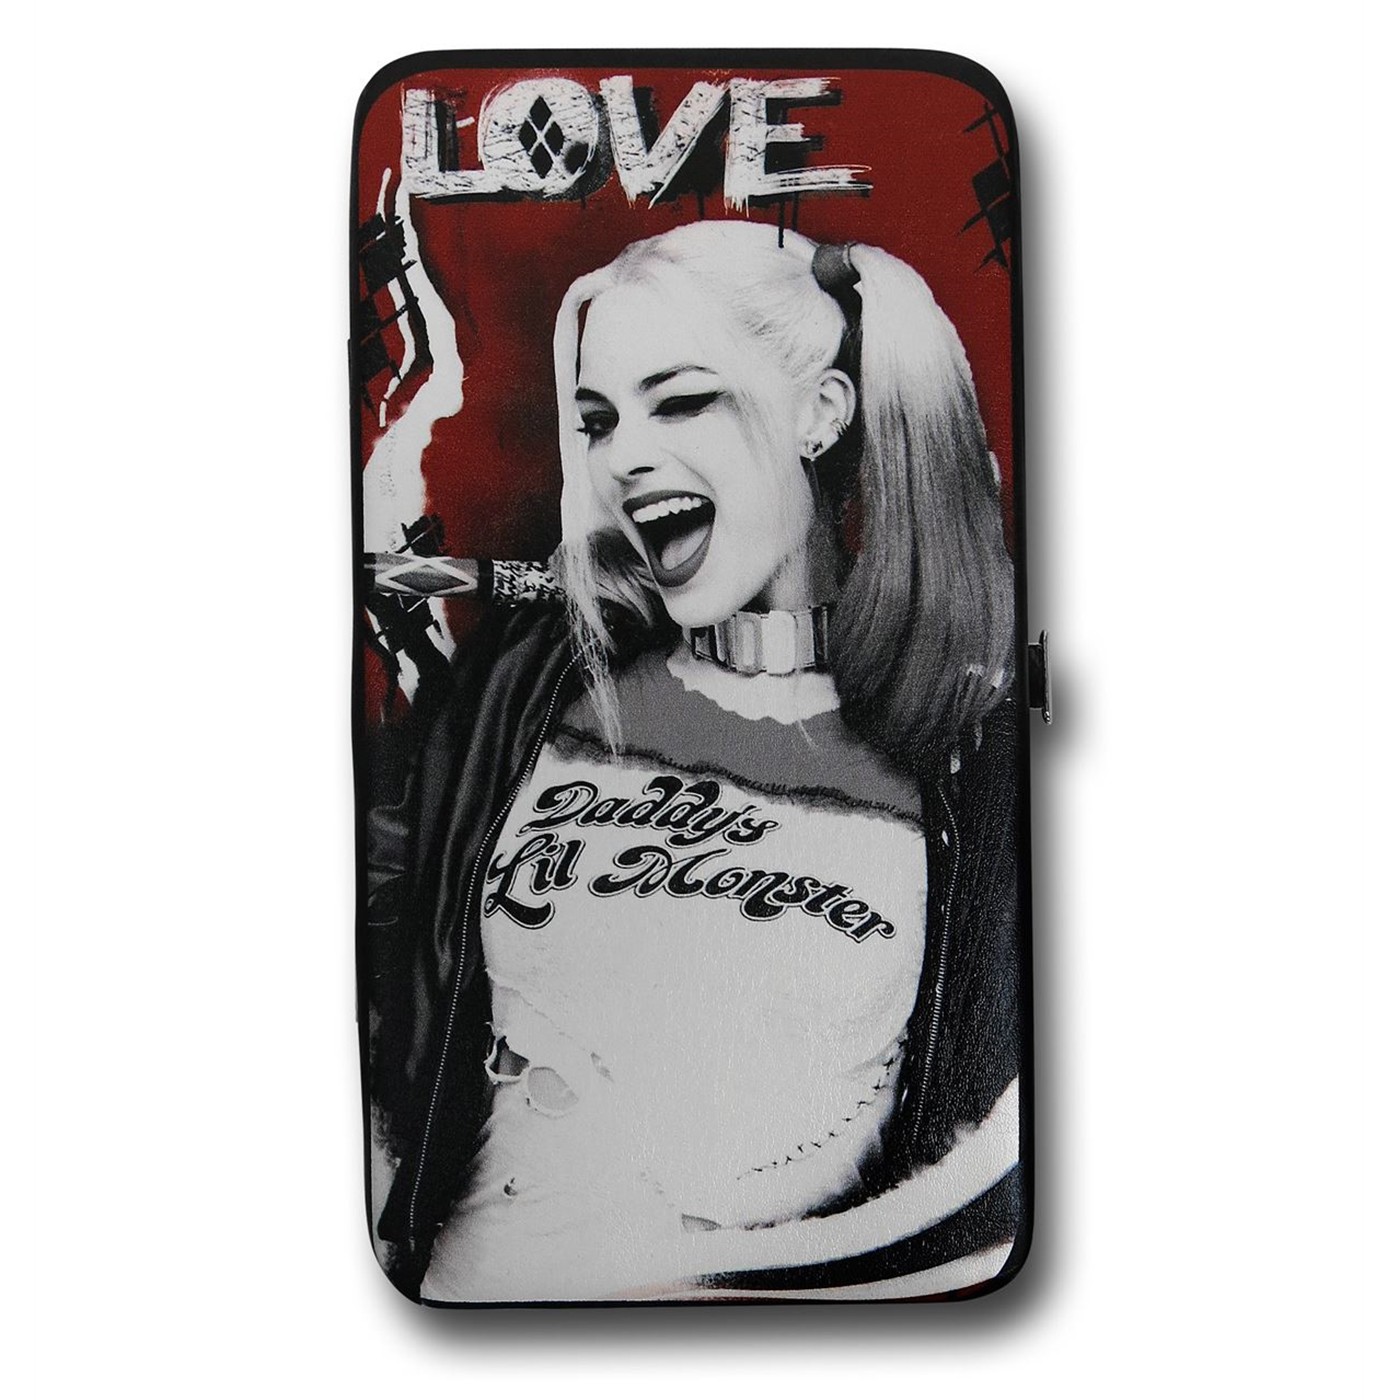 Suicide Squad Mad Love Women's Hinged Wallet